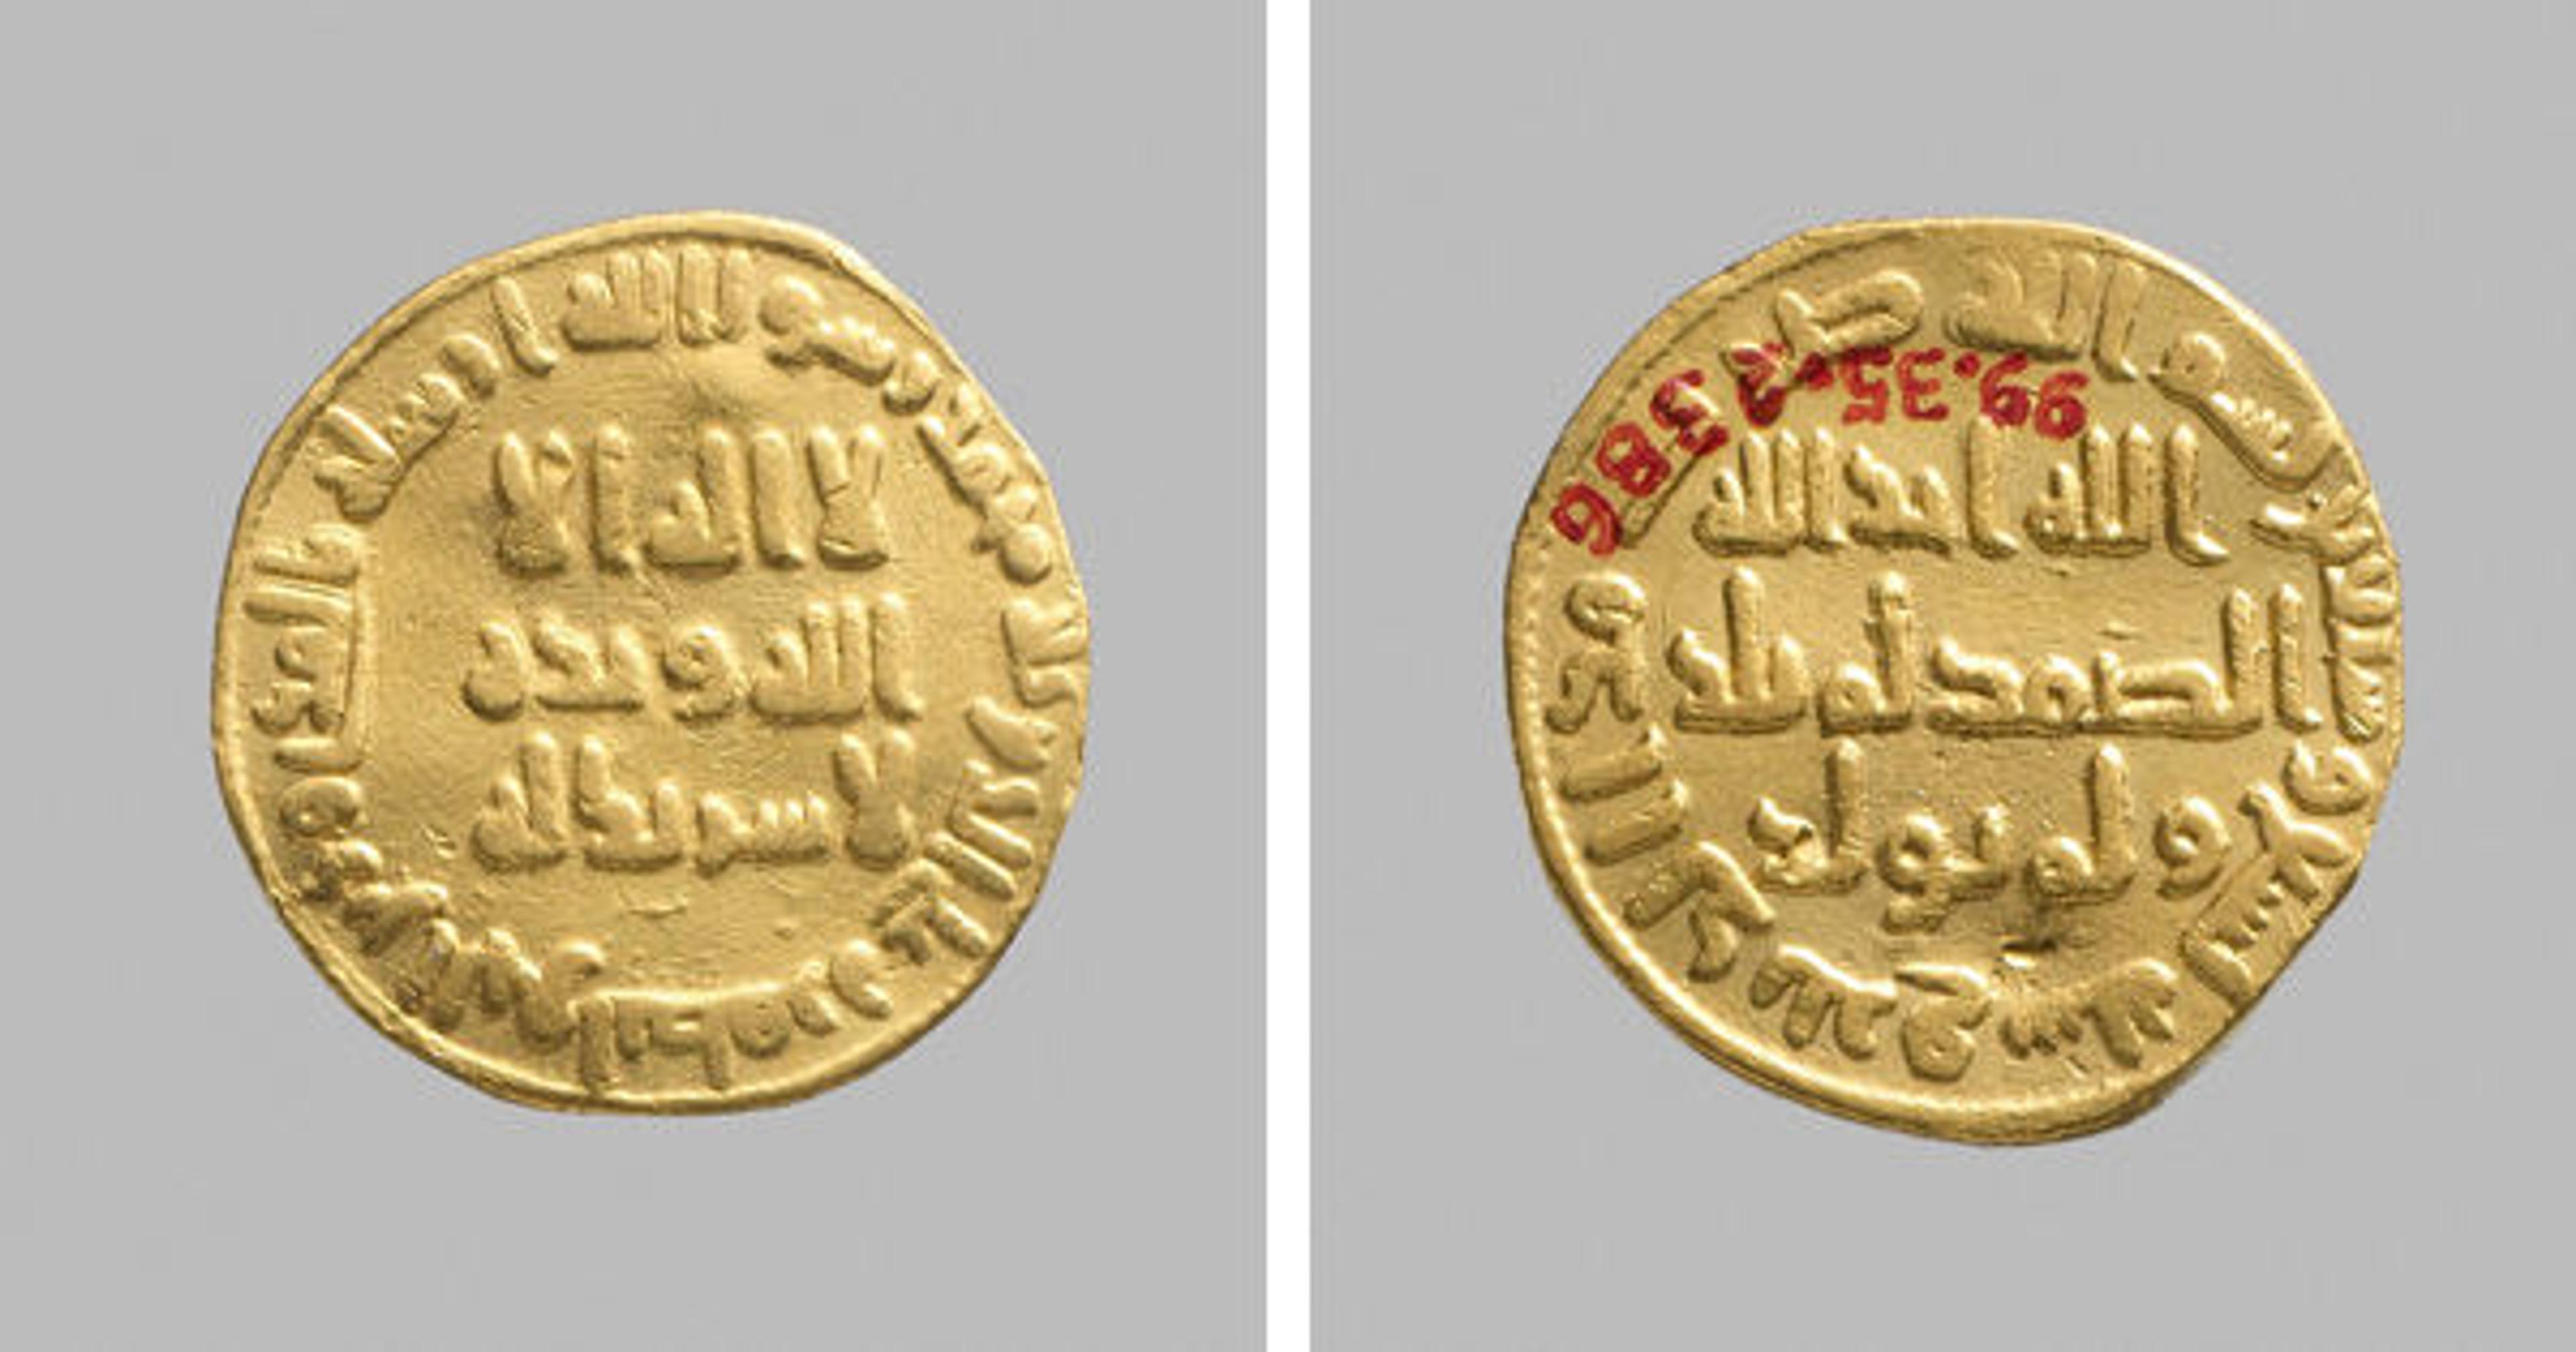 Coin, dated A.H. 79/A.D. 698–99. Syria. Islamic. Gold; Diam. 13/16 in. (2.1 cm). The Metropolitan Museum of Art, New York, Bequest of Joseph H. Durkee, 1898 (99.35.2386)